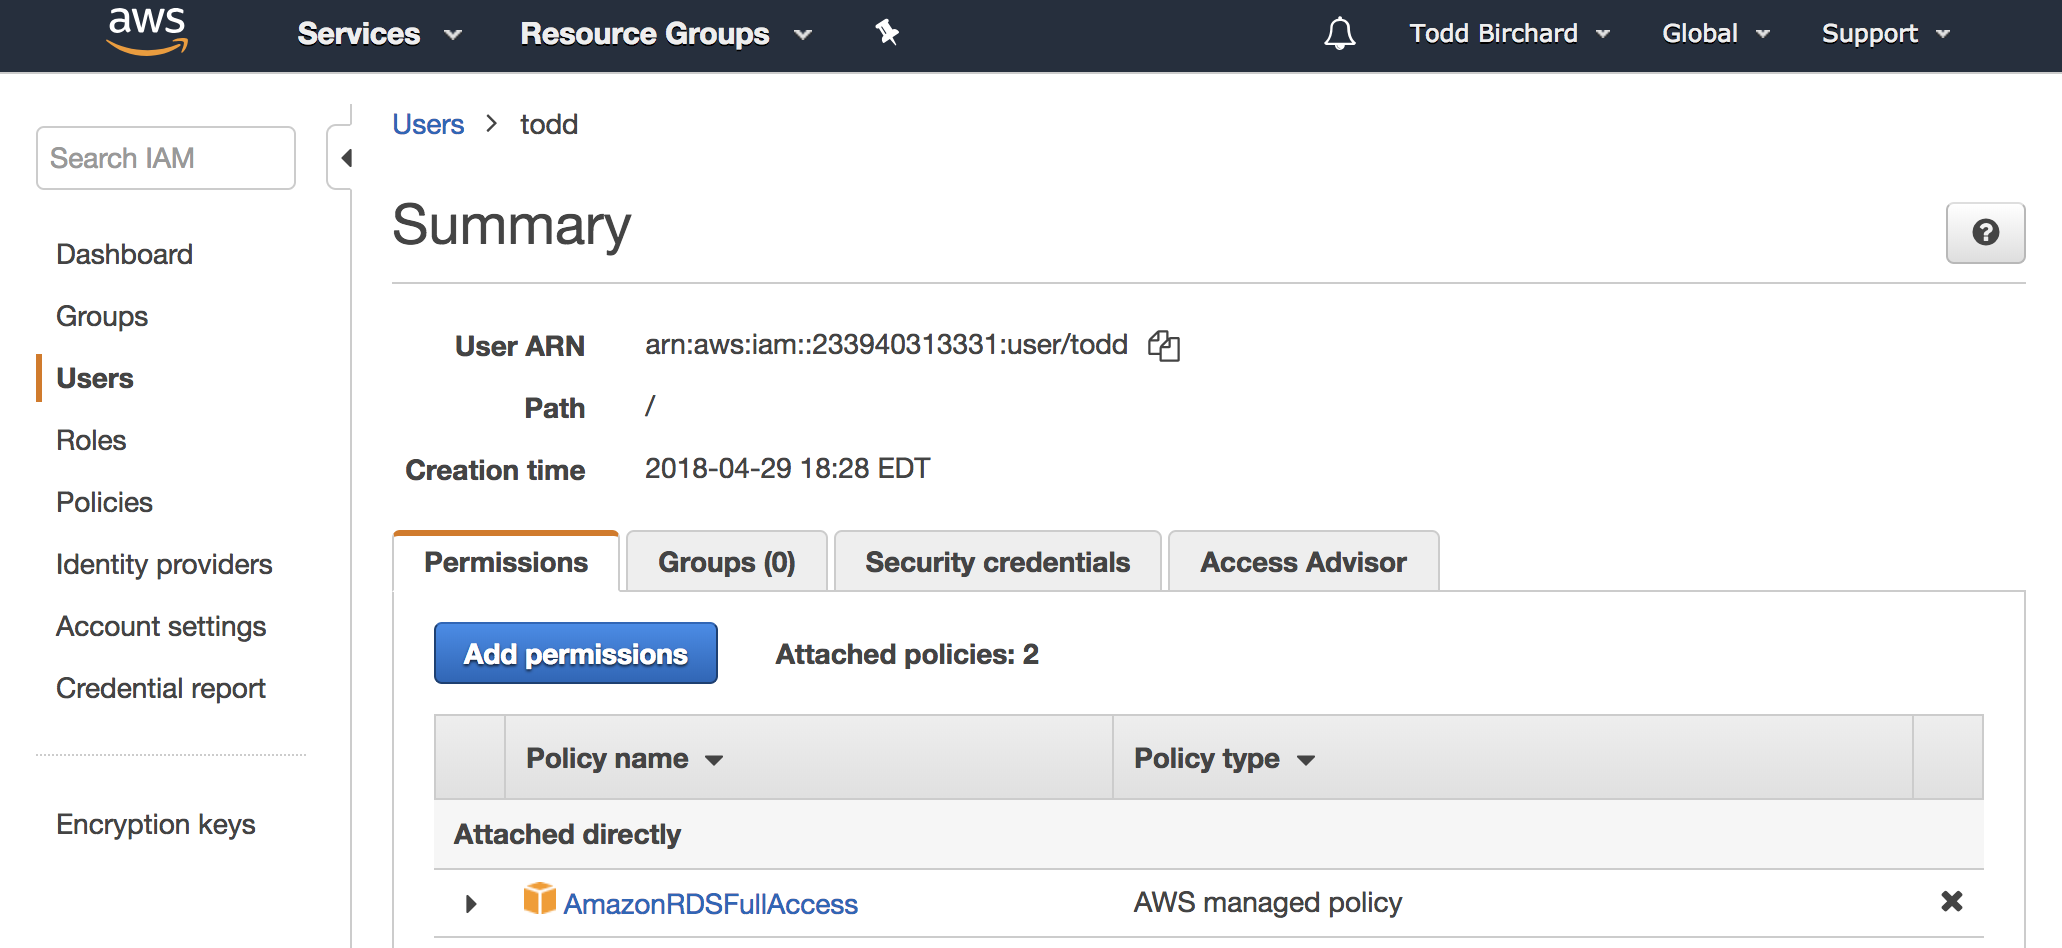 Adding the AmazonRDSFullAccess policy to an AWS user permission group